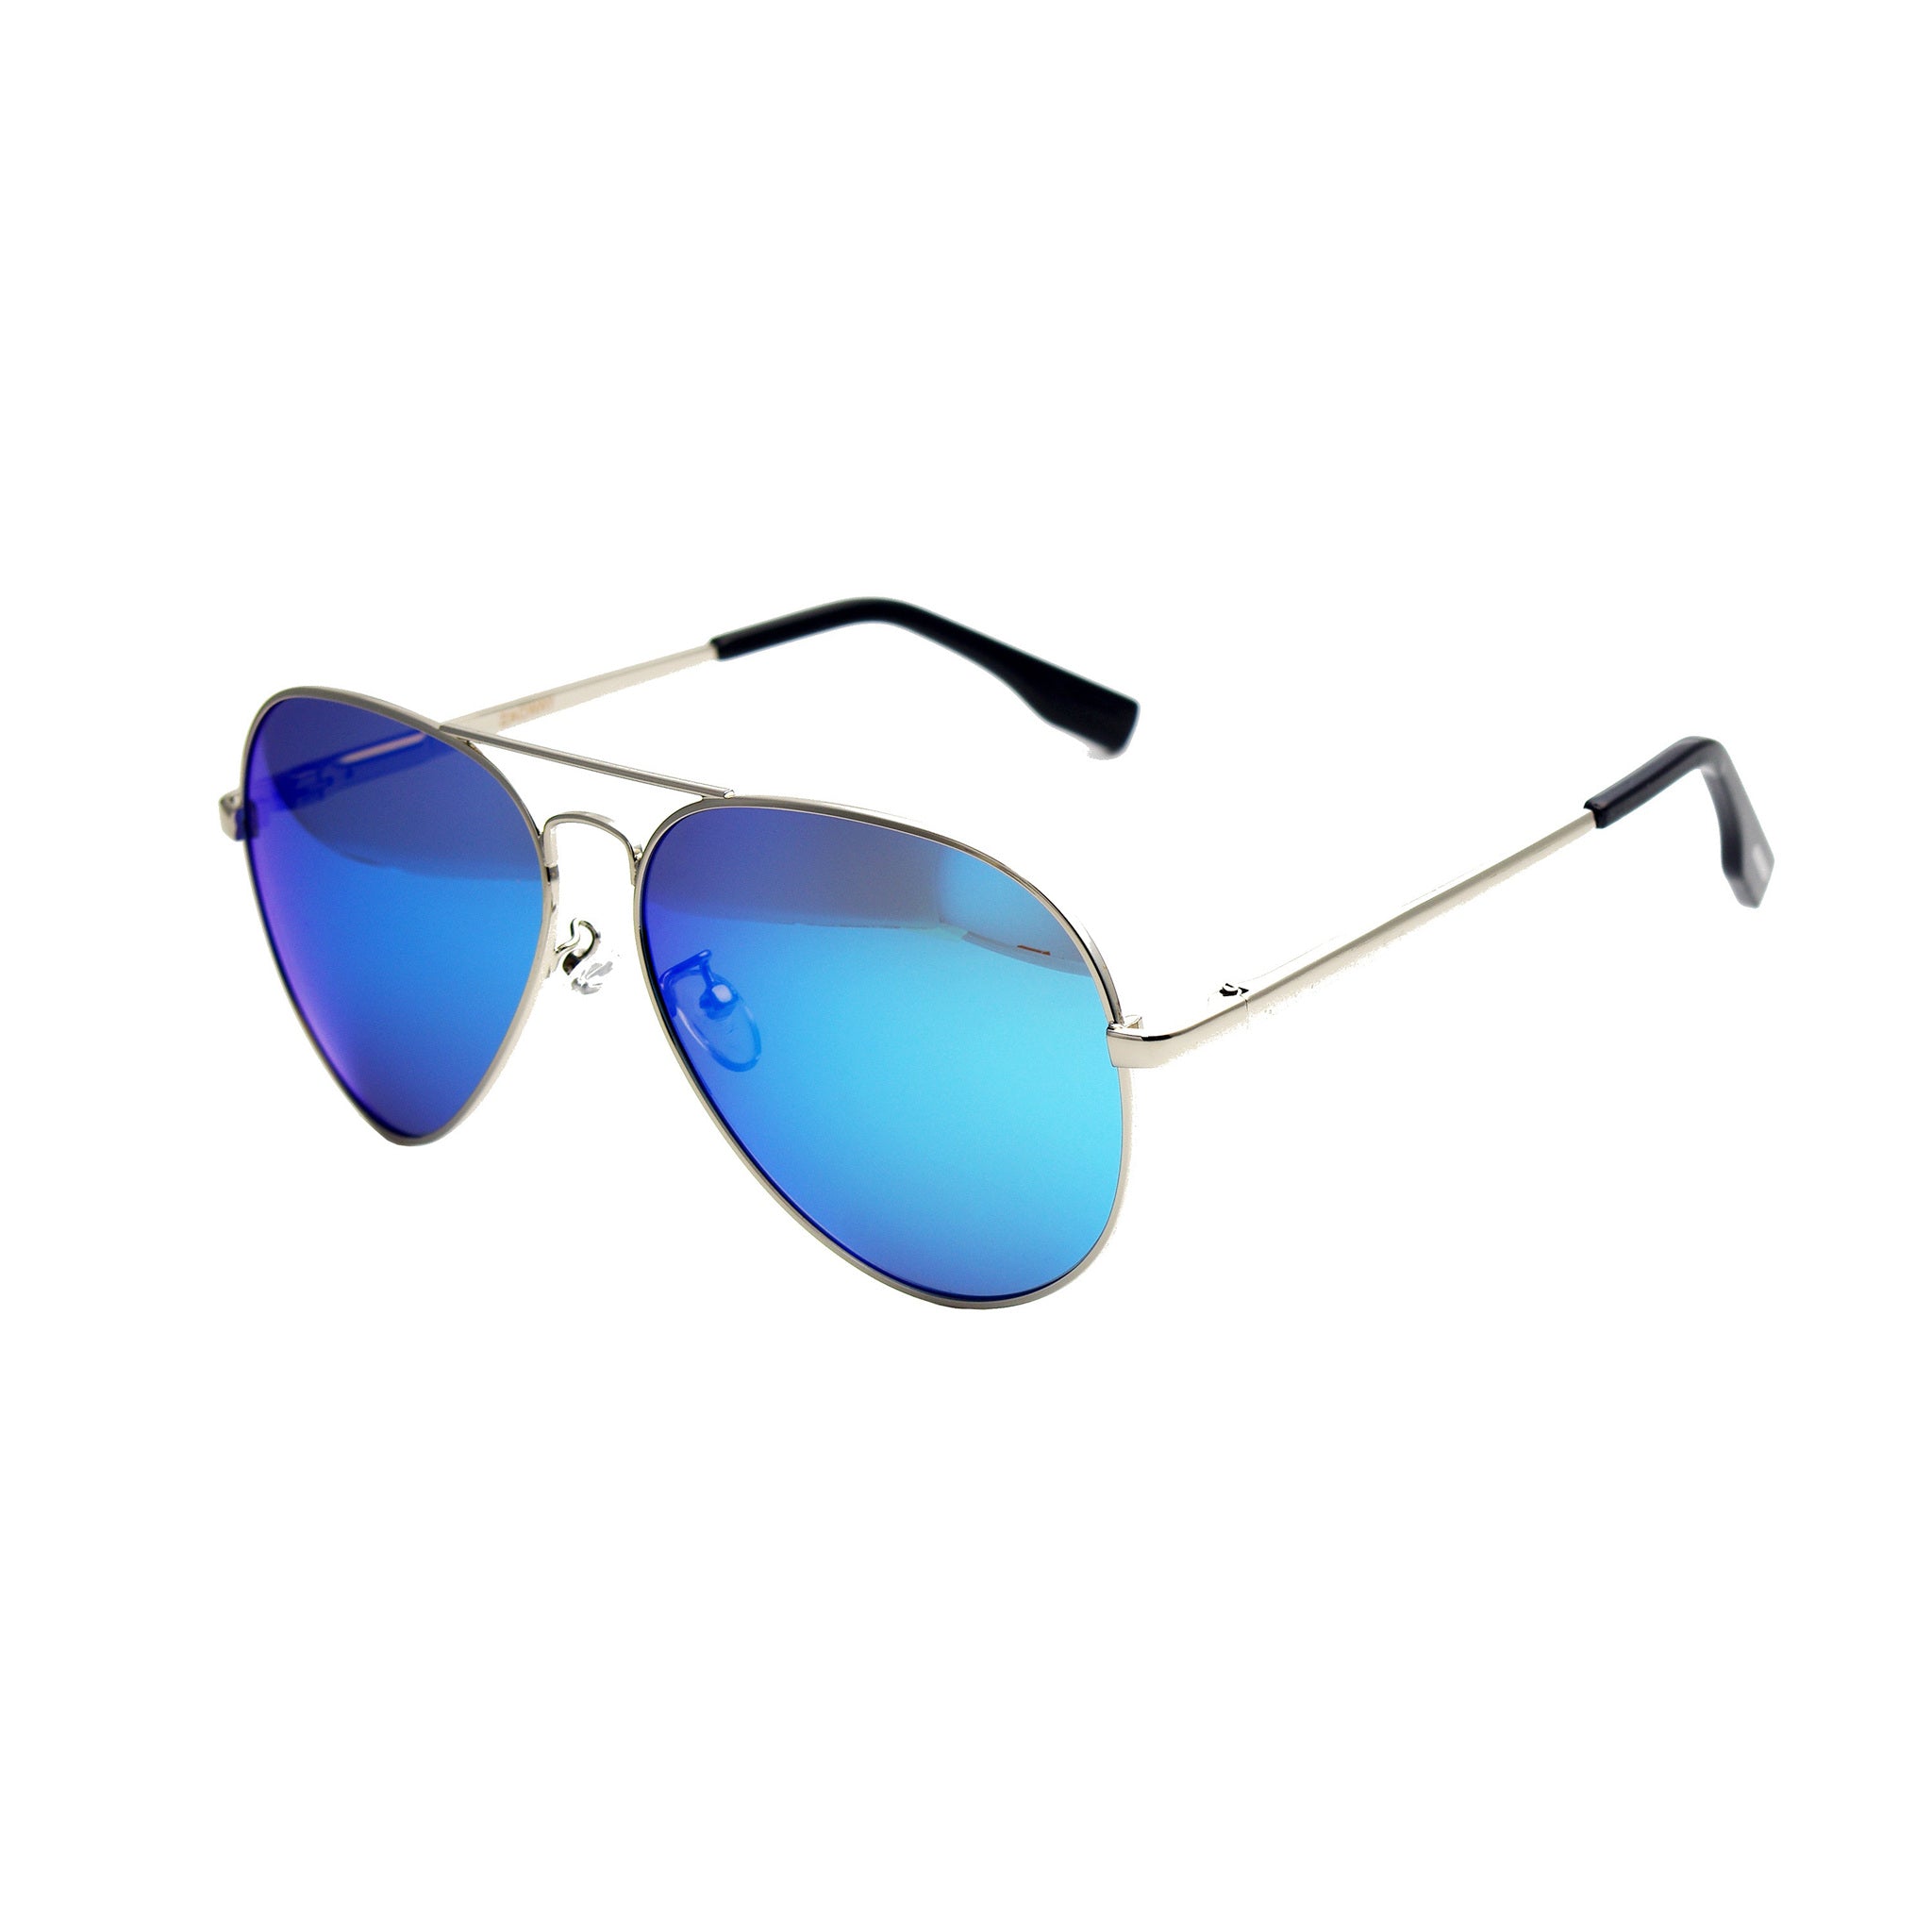 AVRO1038L - Polarized Aviator Sunglasses with Spring Hinges For Men Wo ...